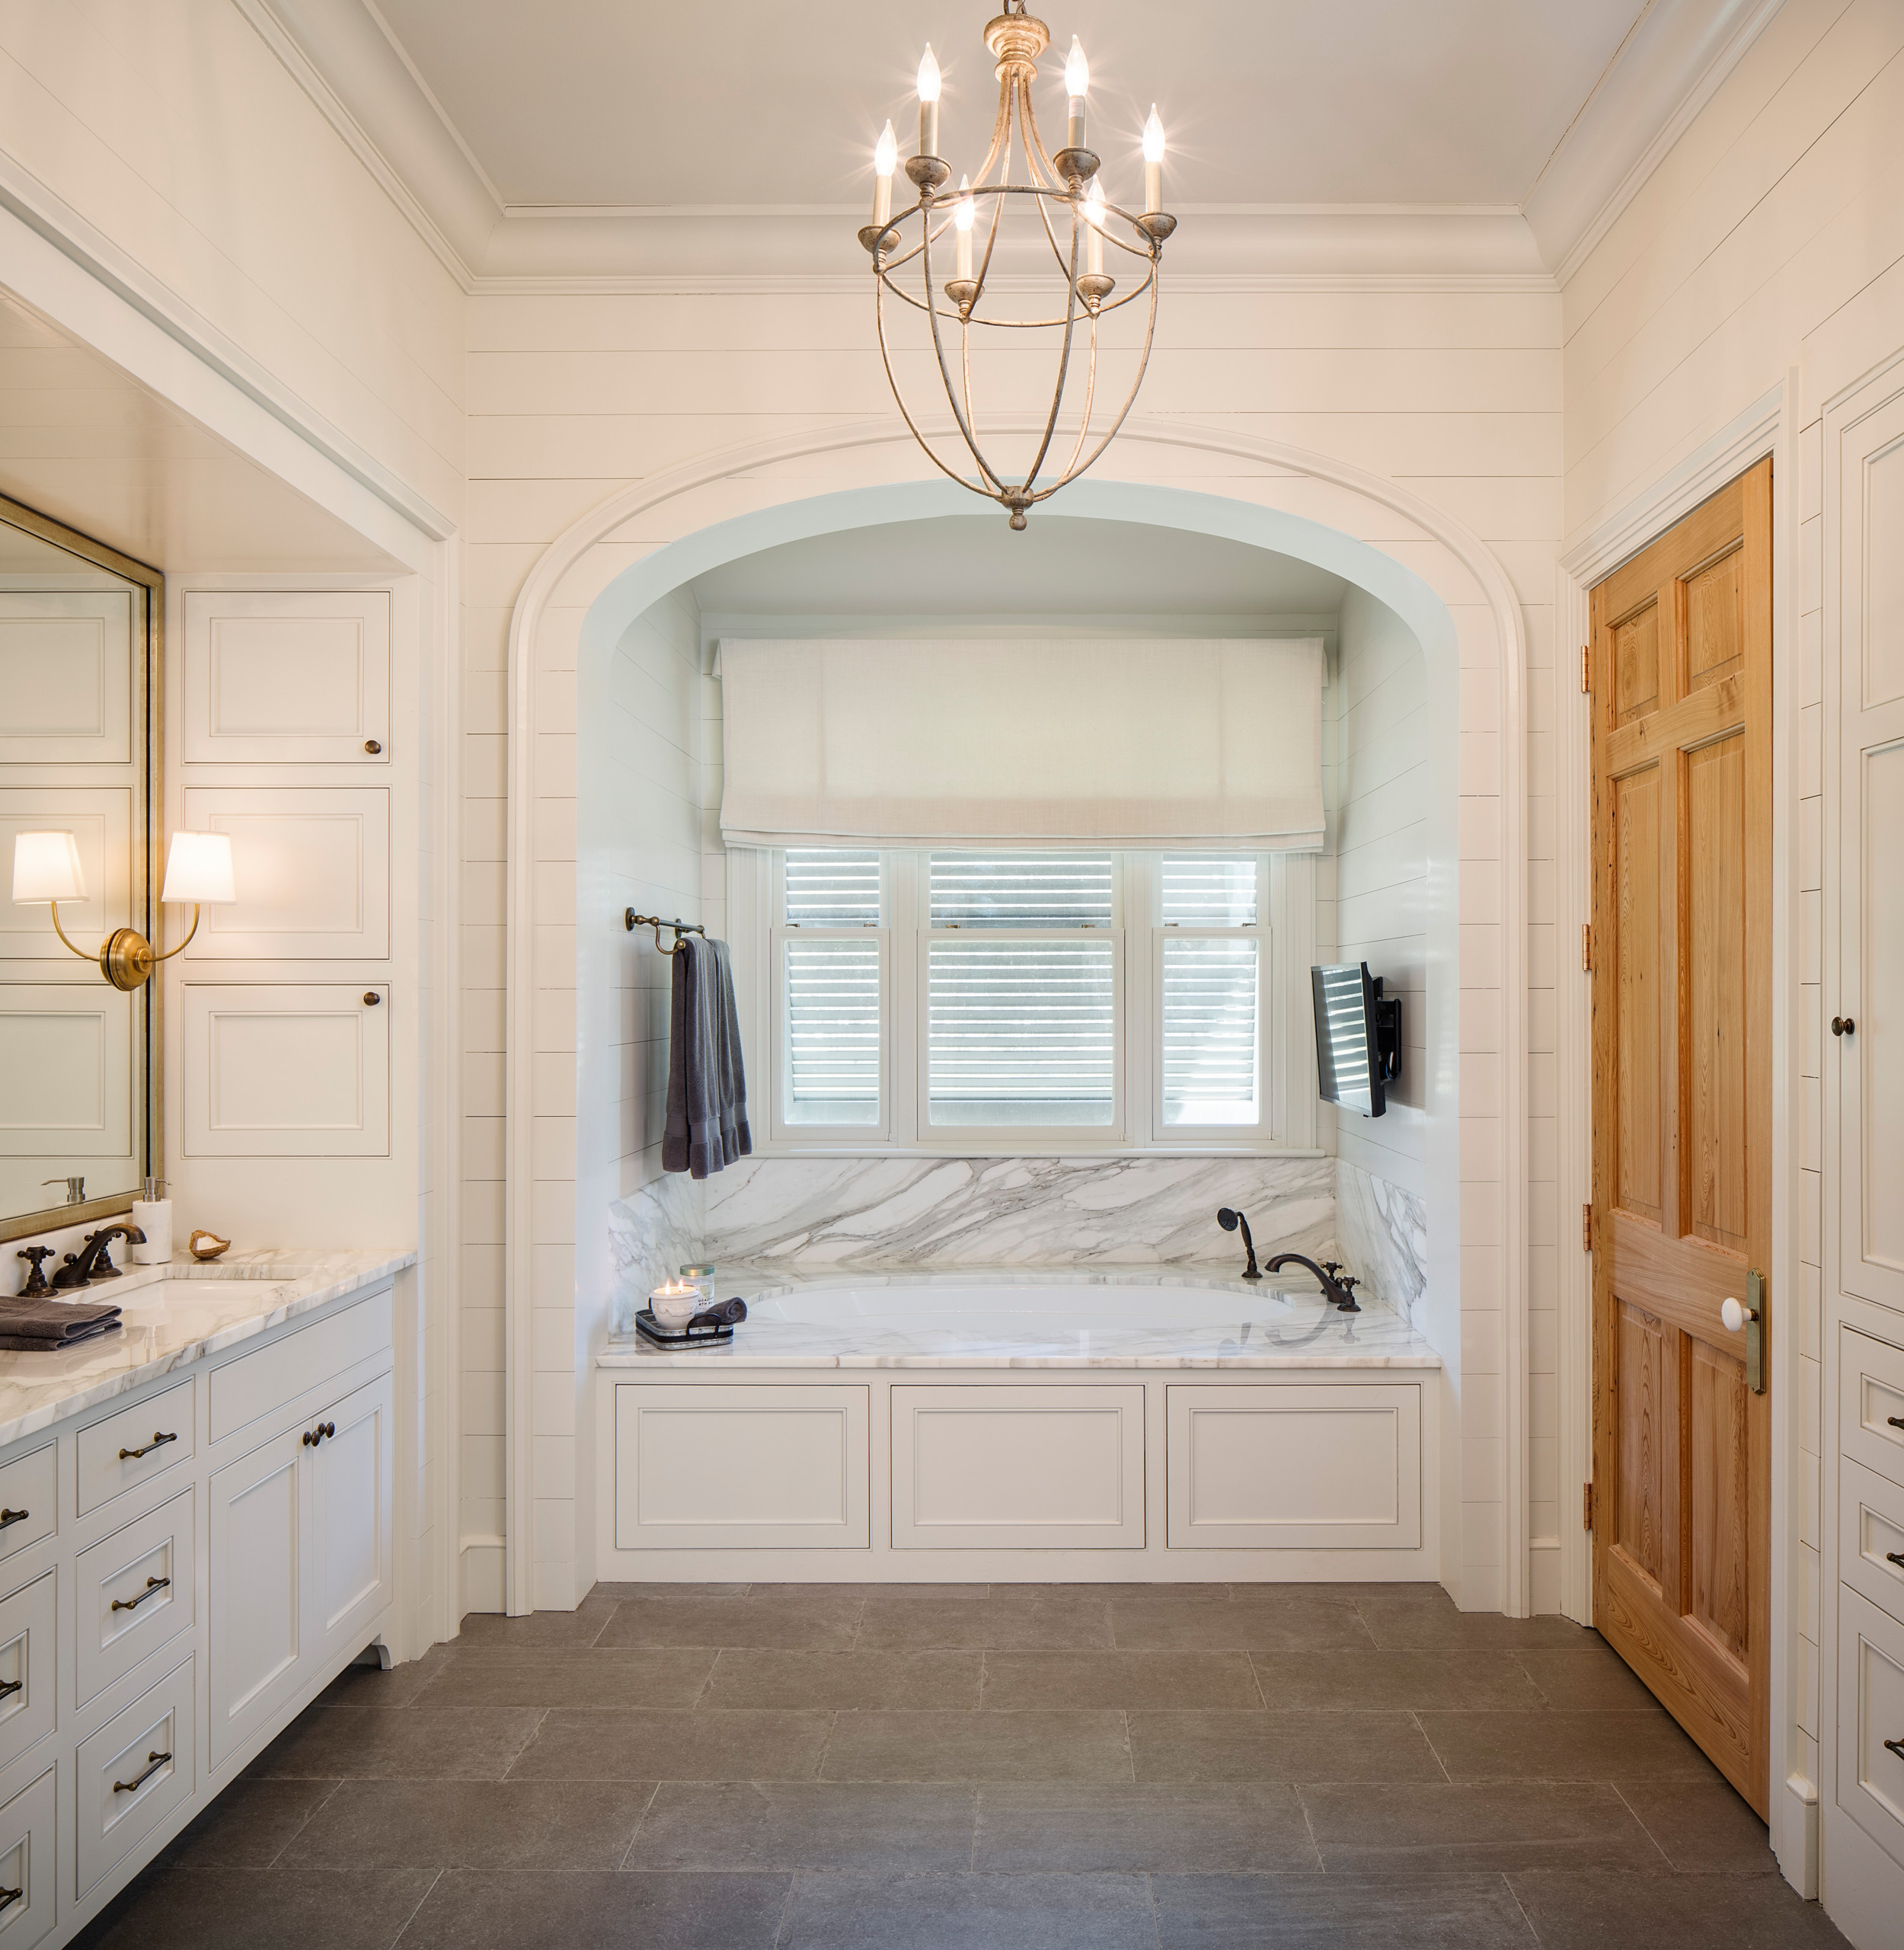 75 Beautiful Shiplap Wall Bathroom Pictures Ideas June 2021 Houzz